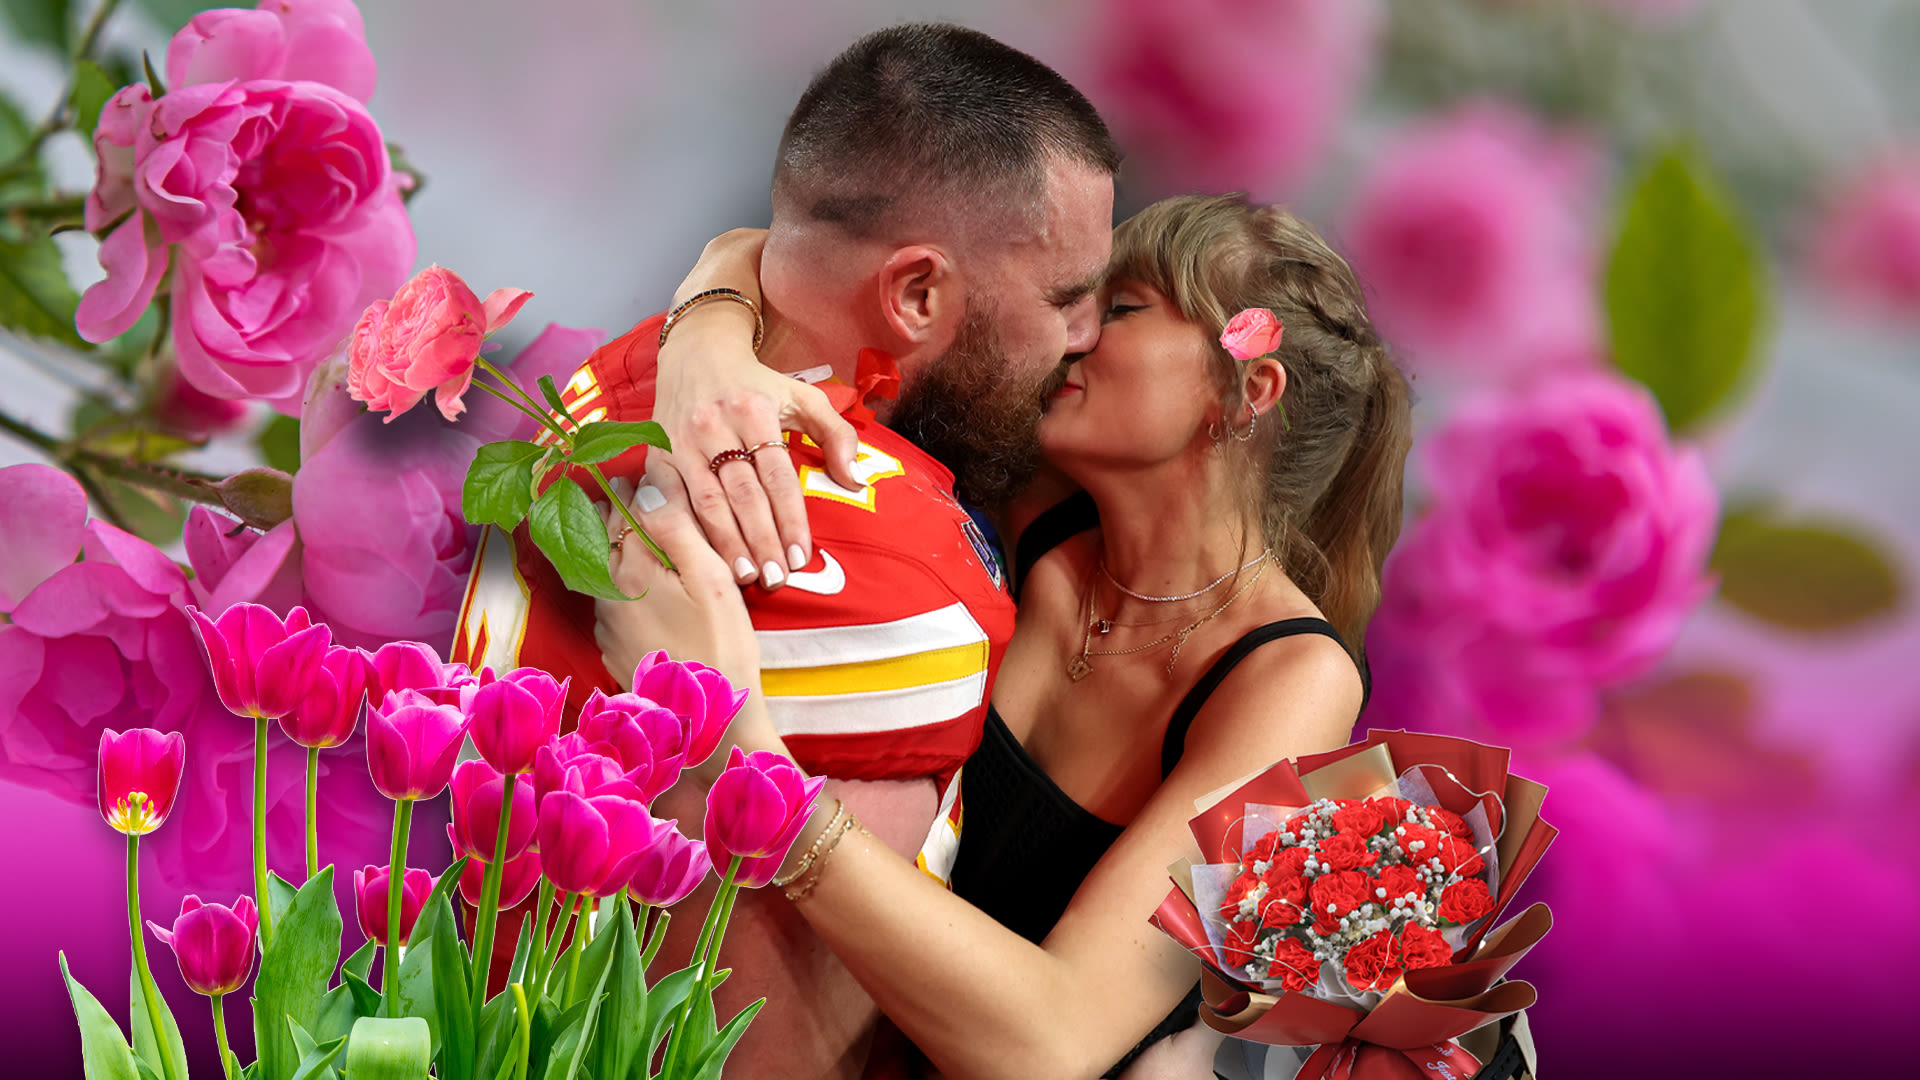 Travis Kelce splashes out thousands on Taylor Swift's favorite flowers